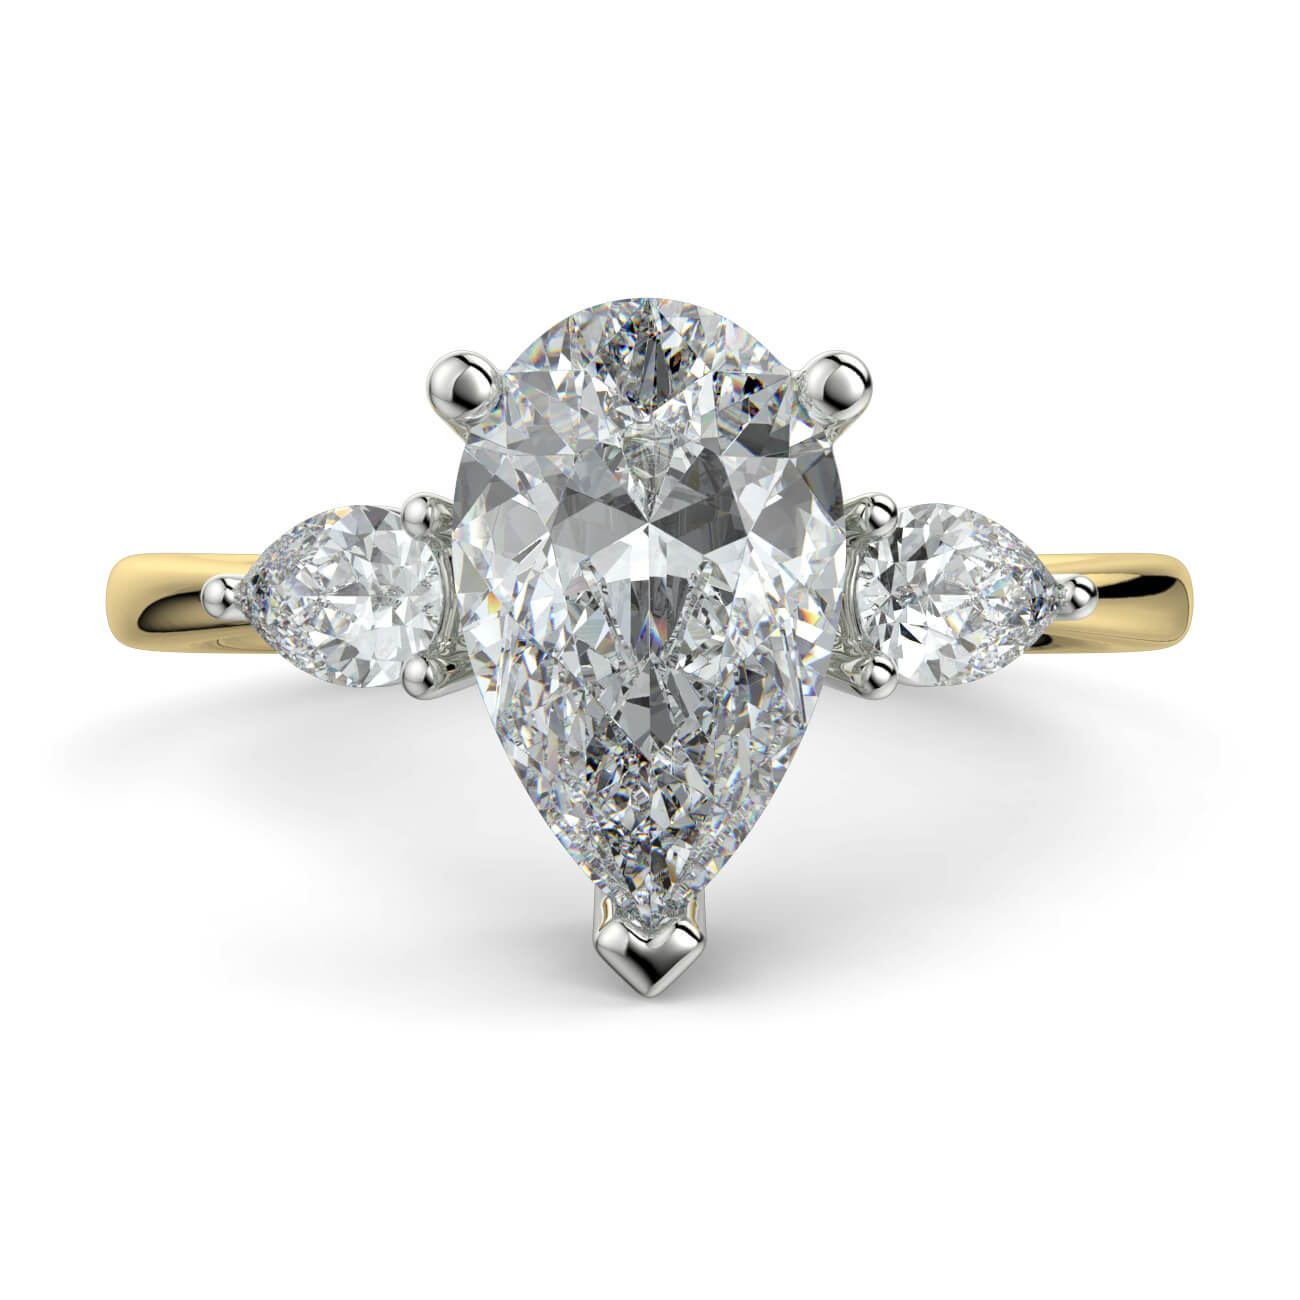 Pear Shape Diamond Ring With Pear Shape Side Diamonds In Yellow and White Gold – Australian Diamond Network